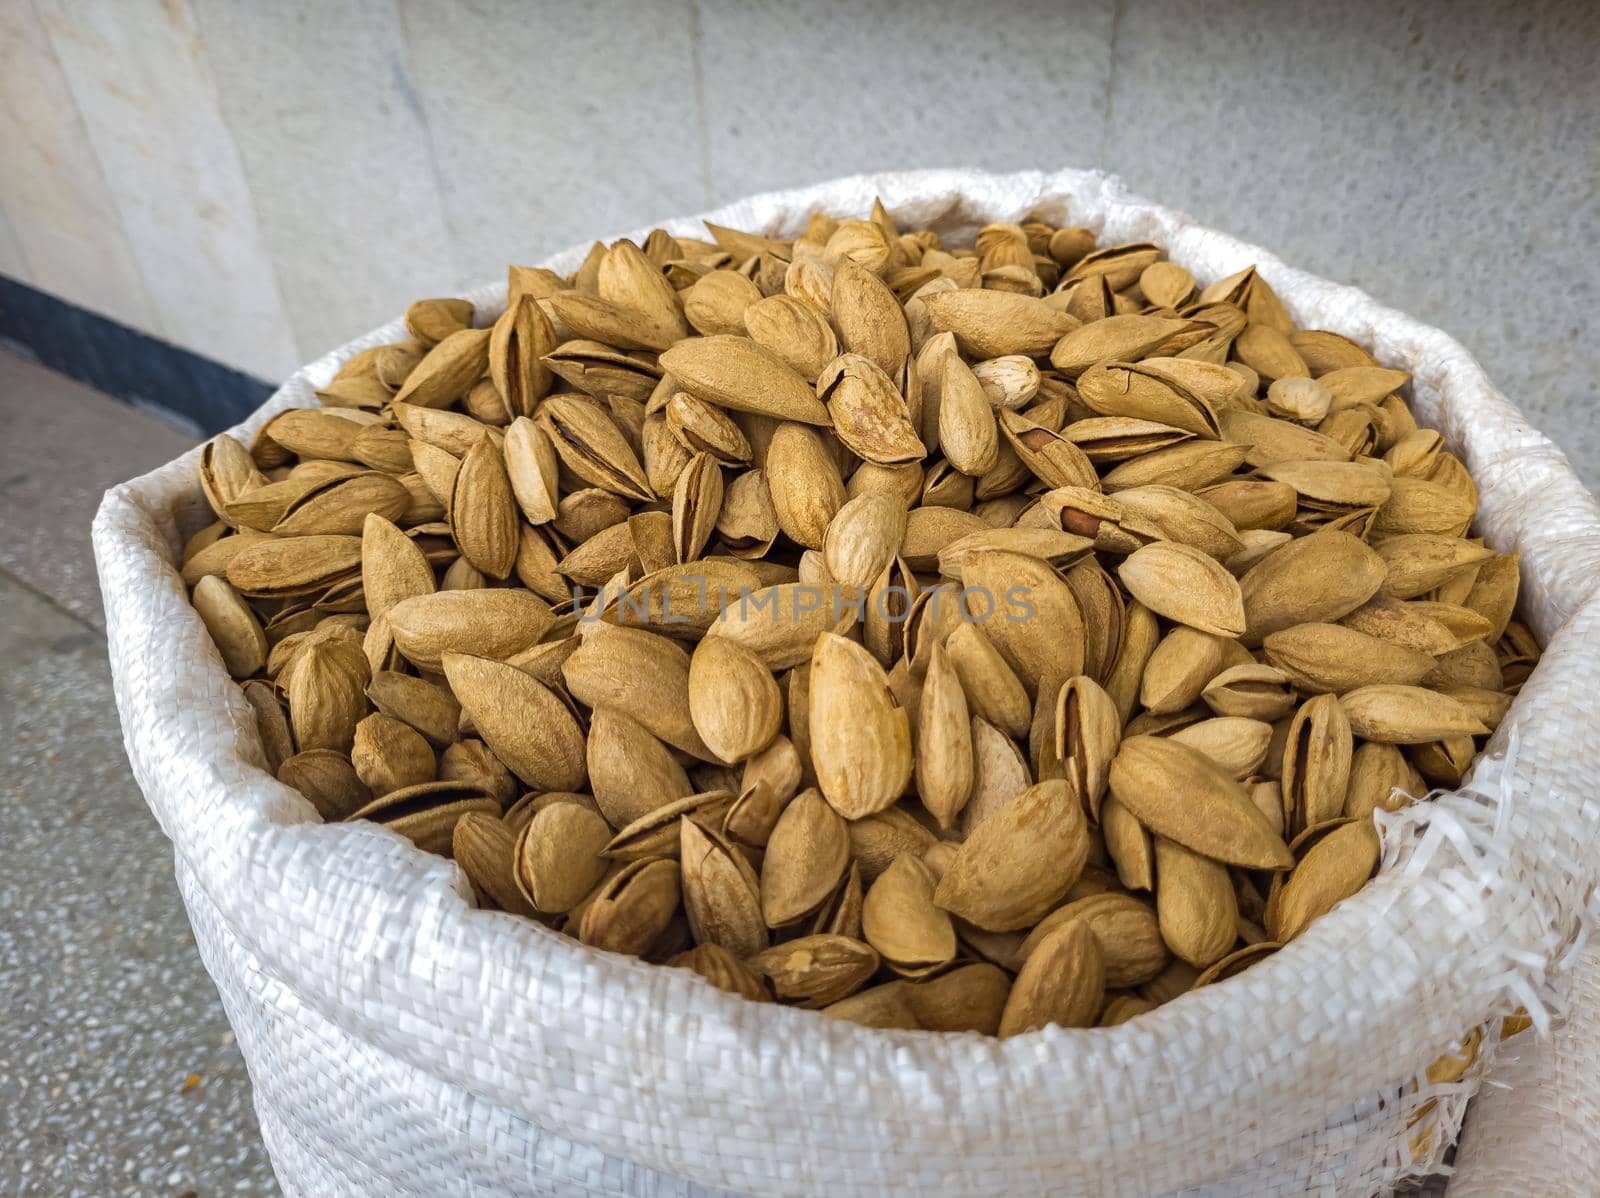 Oriental Bazaar. Almond peeled and unpeeled, nuts sales in market. Dry food, variety almonds in store. Concept of healthy eating, raw product, bazaar, diet, almond theme by Milanchikov